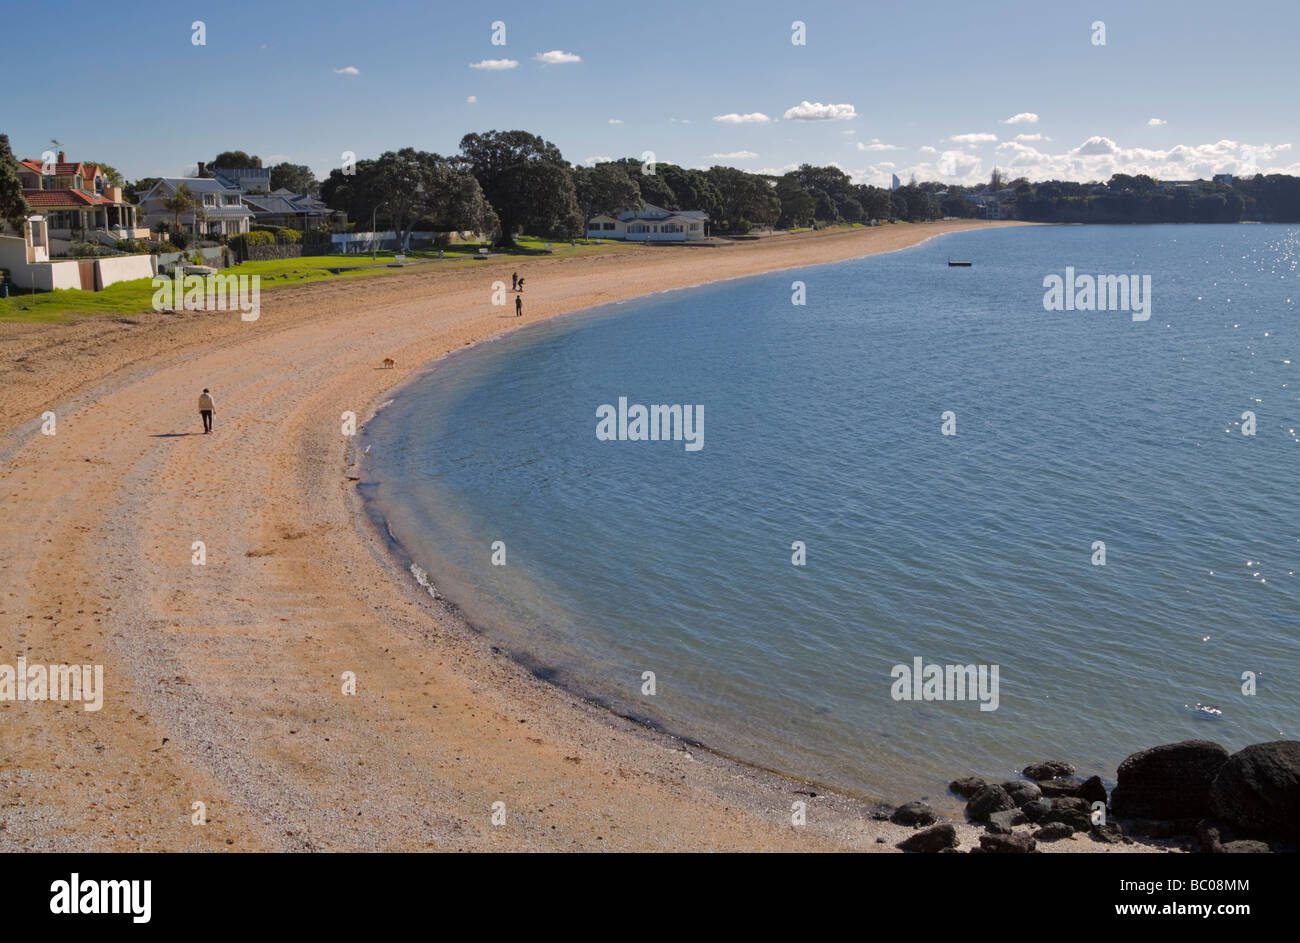 Cheltenham Beach, Devonport, North Island, New Zealand. This beach is composed of pieces of shells, not sand or pebbles. Stock Photo